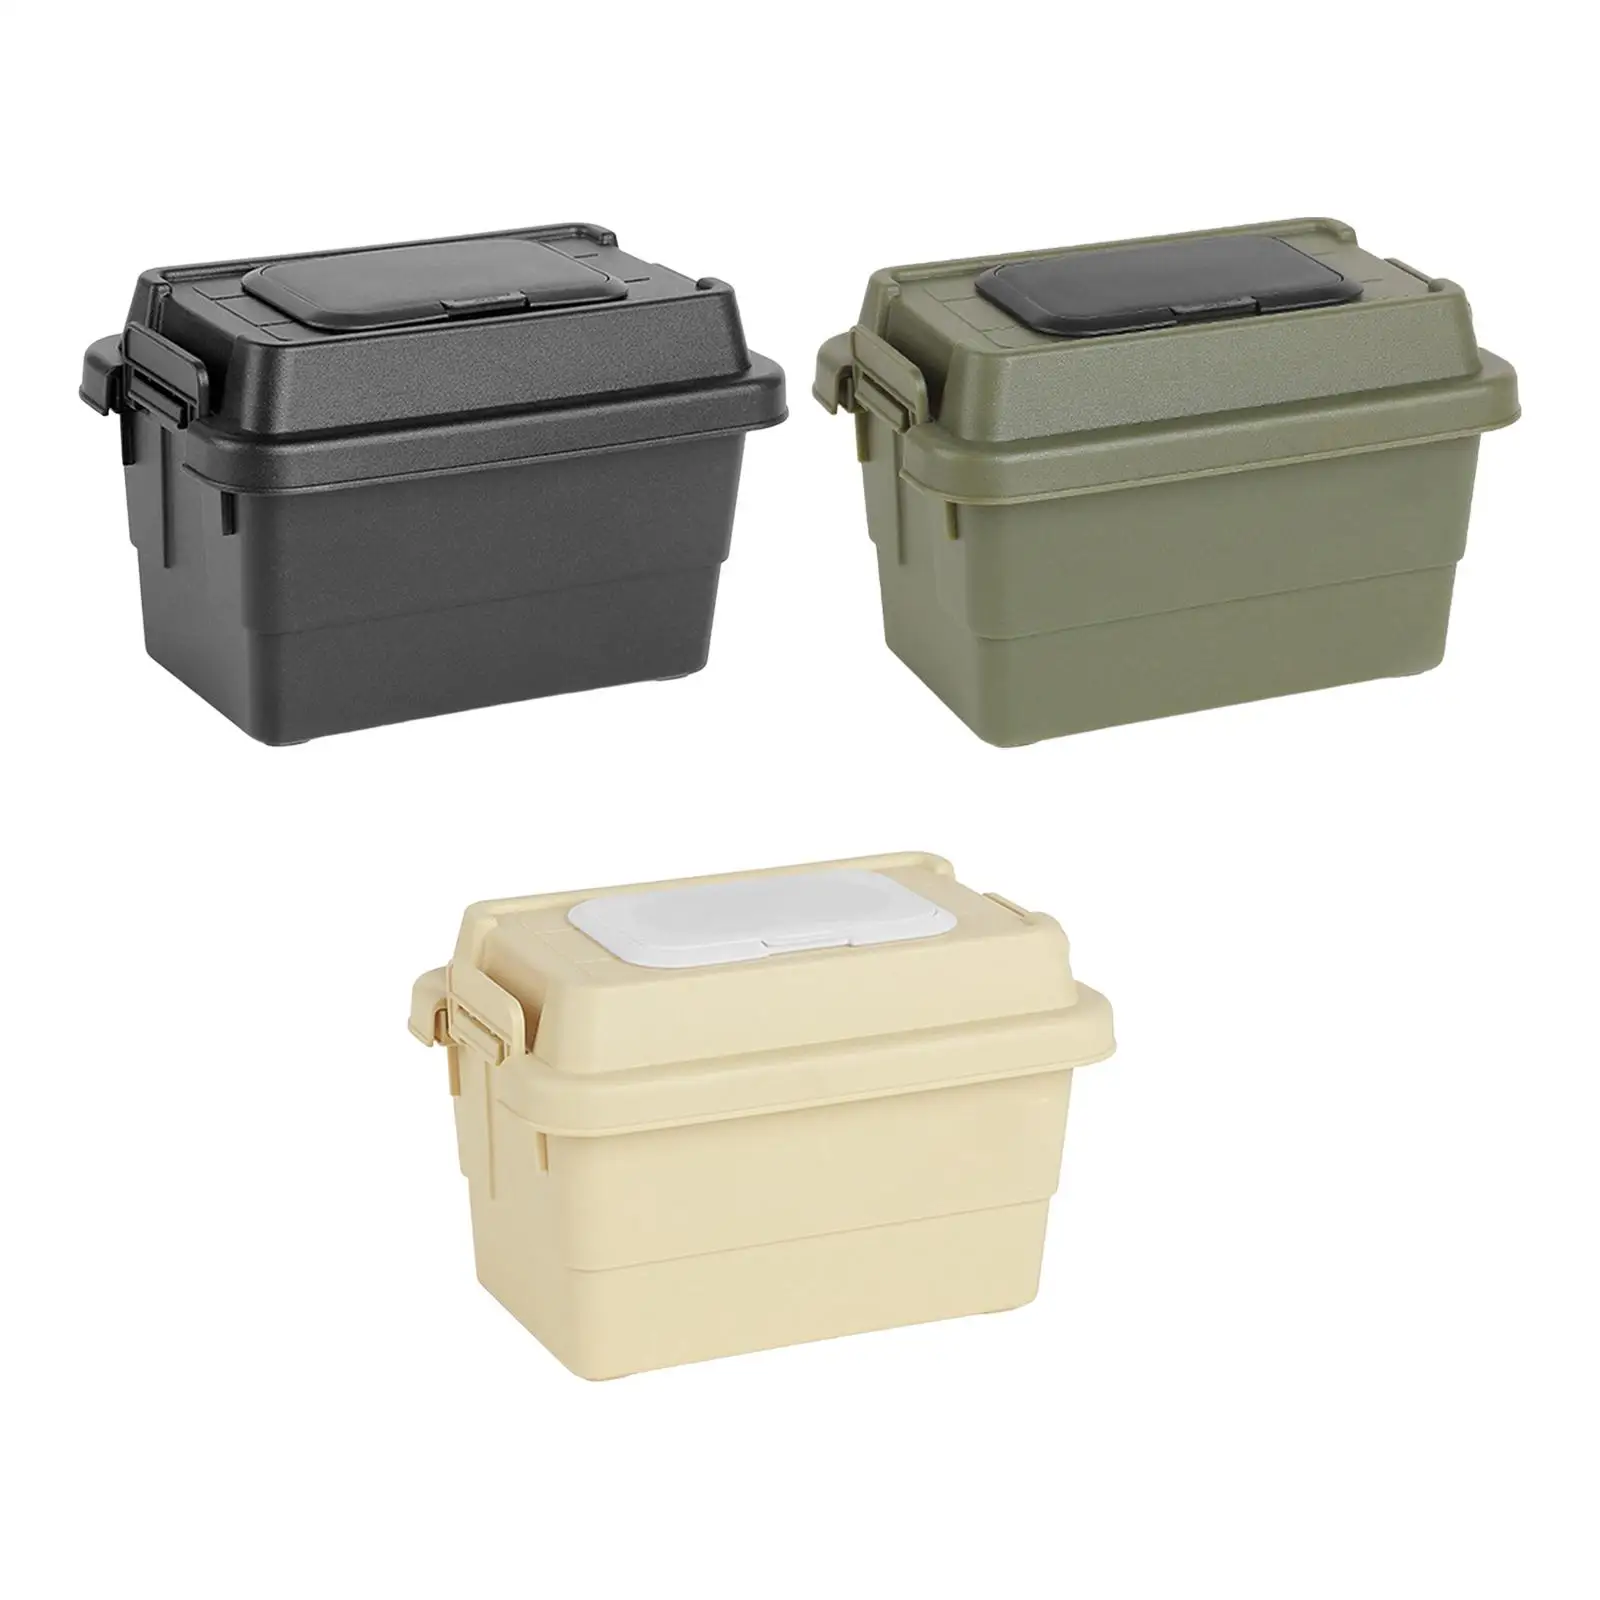 Camping Storage Box Sundries Multifunctional Waterproof Thicken Tissue Box with Lid for Car Grocery BBQ Backpacking Traveling